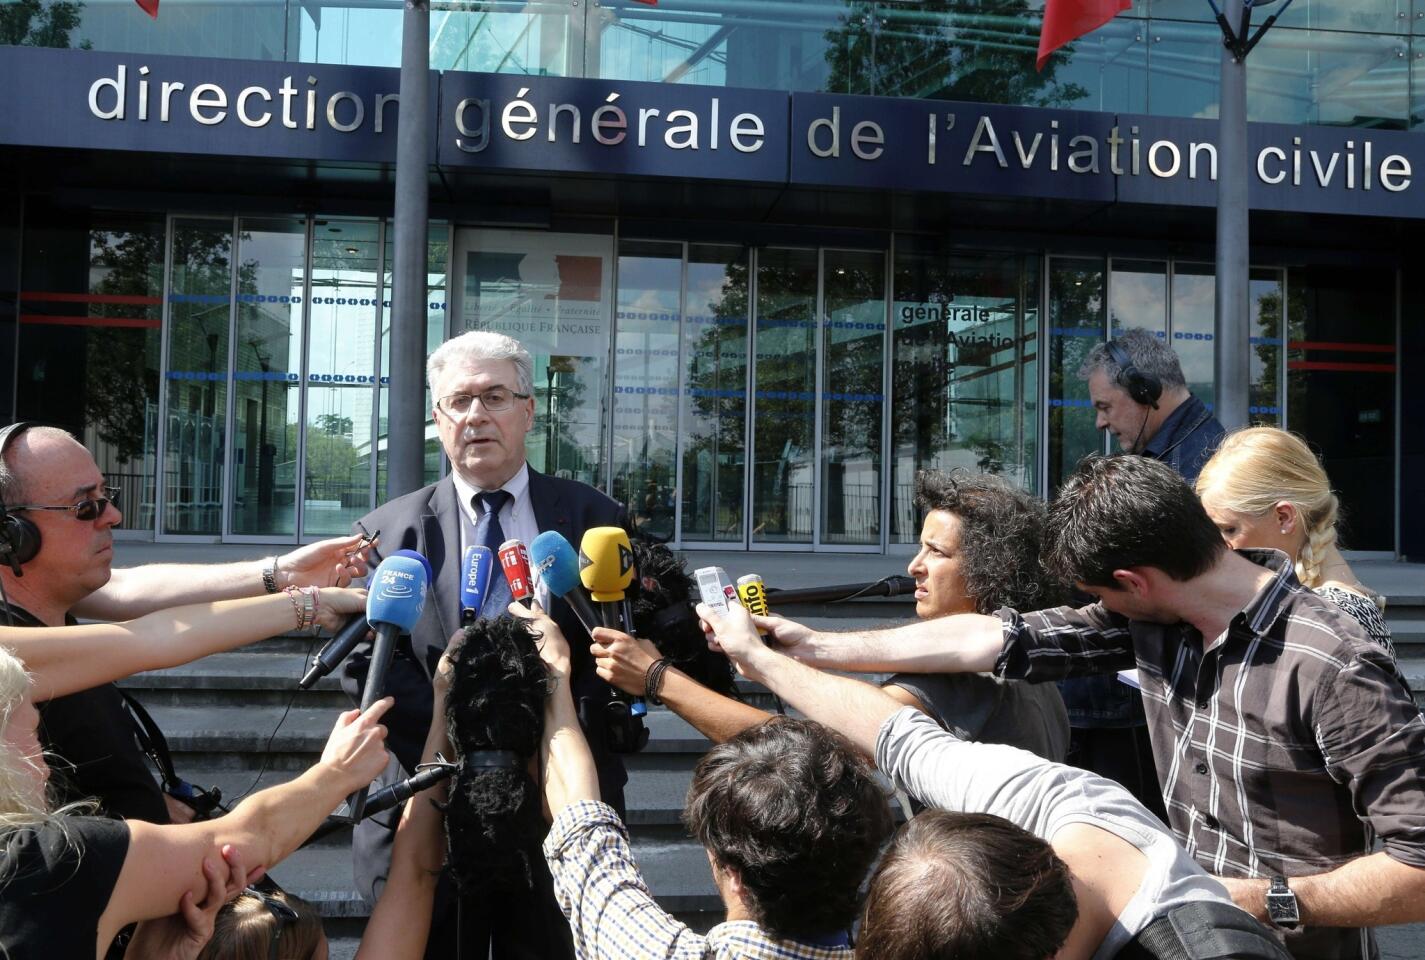 Patrick Gandil, head of the French Civil Aviation Authority, speaks to journalists in Paris about the crash of an Air Algerie plane with 116 people on board.